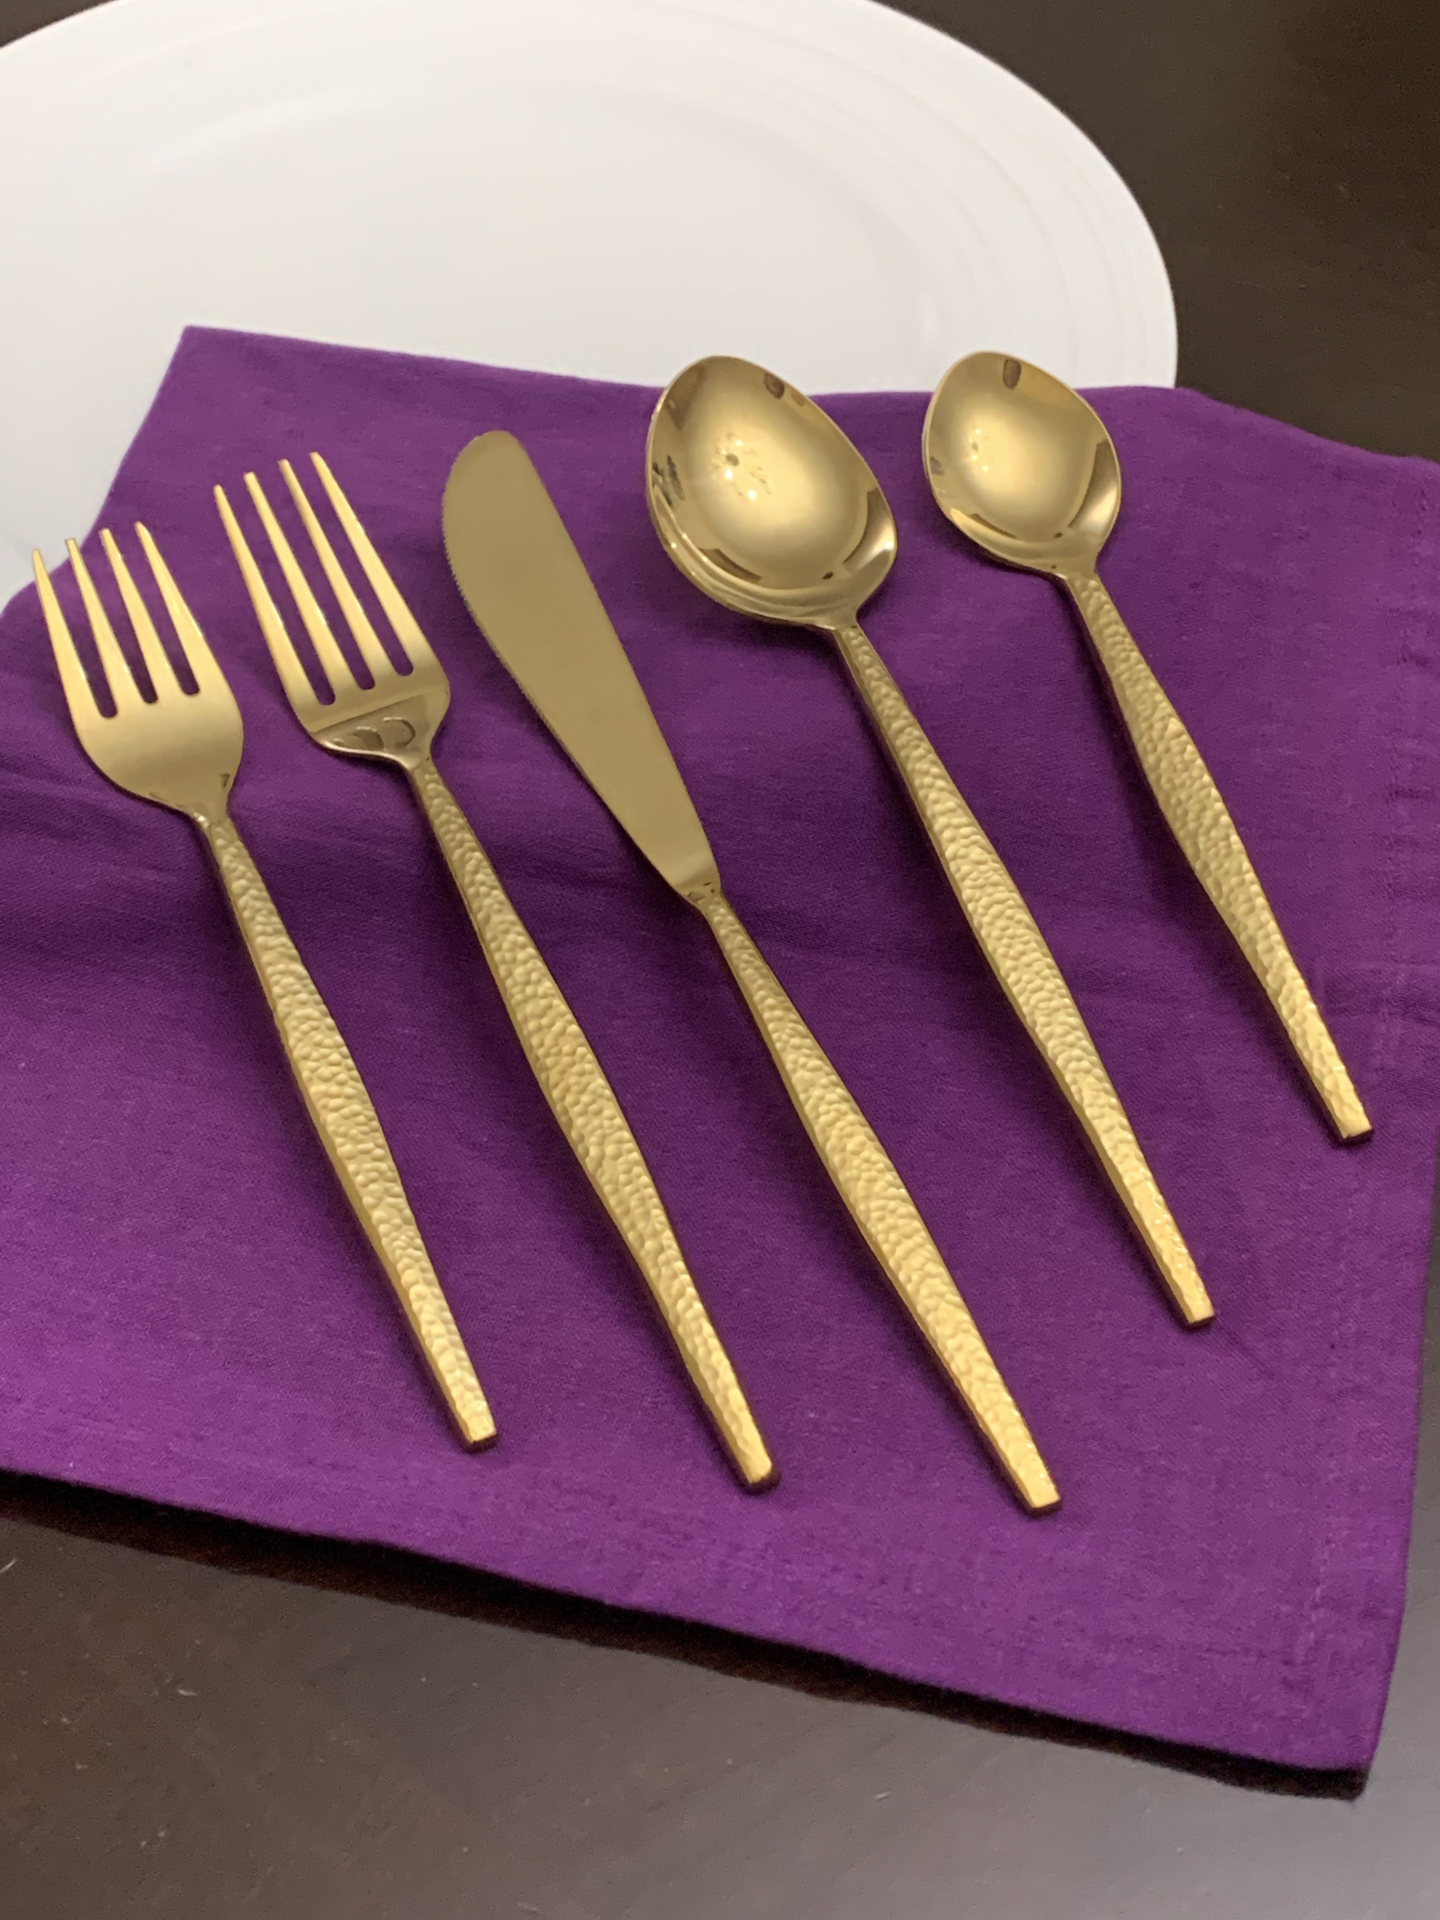 Vibhsa 20 Piece Gold Flatware Set, Service for 4-Hammered